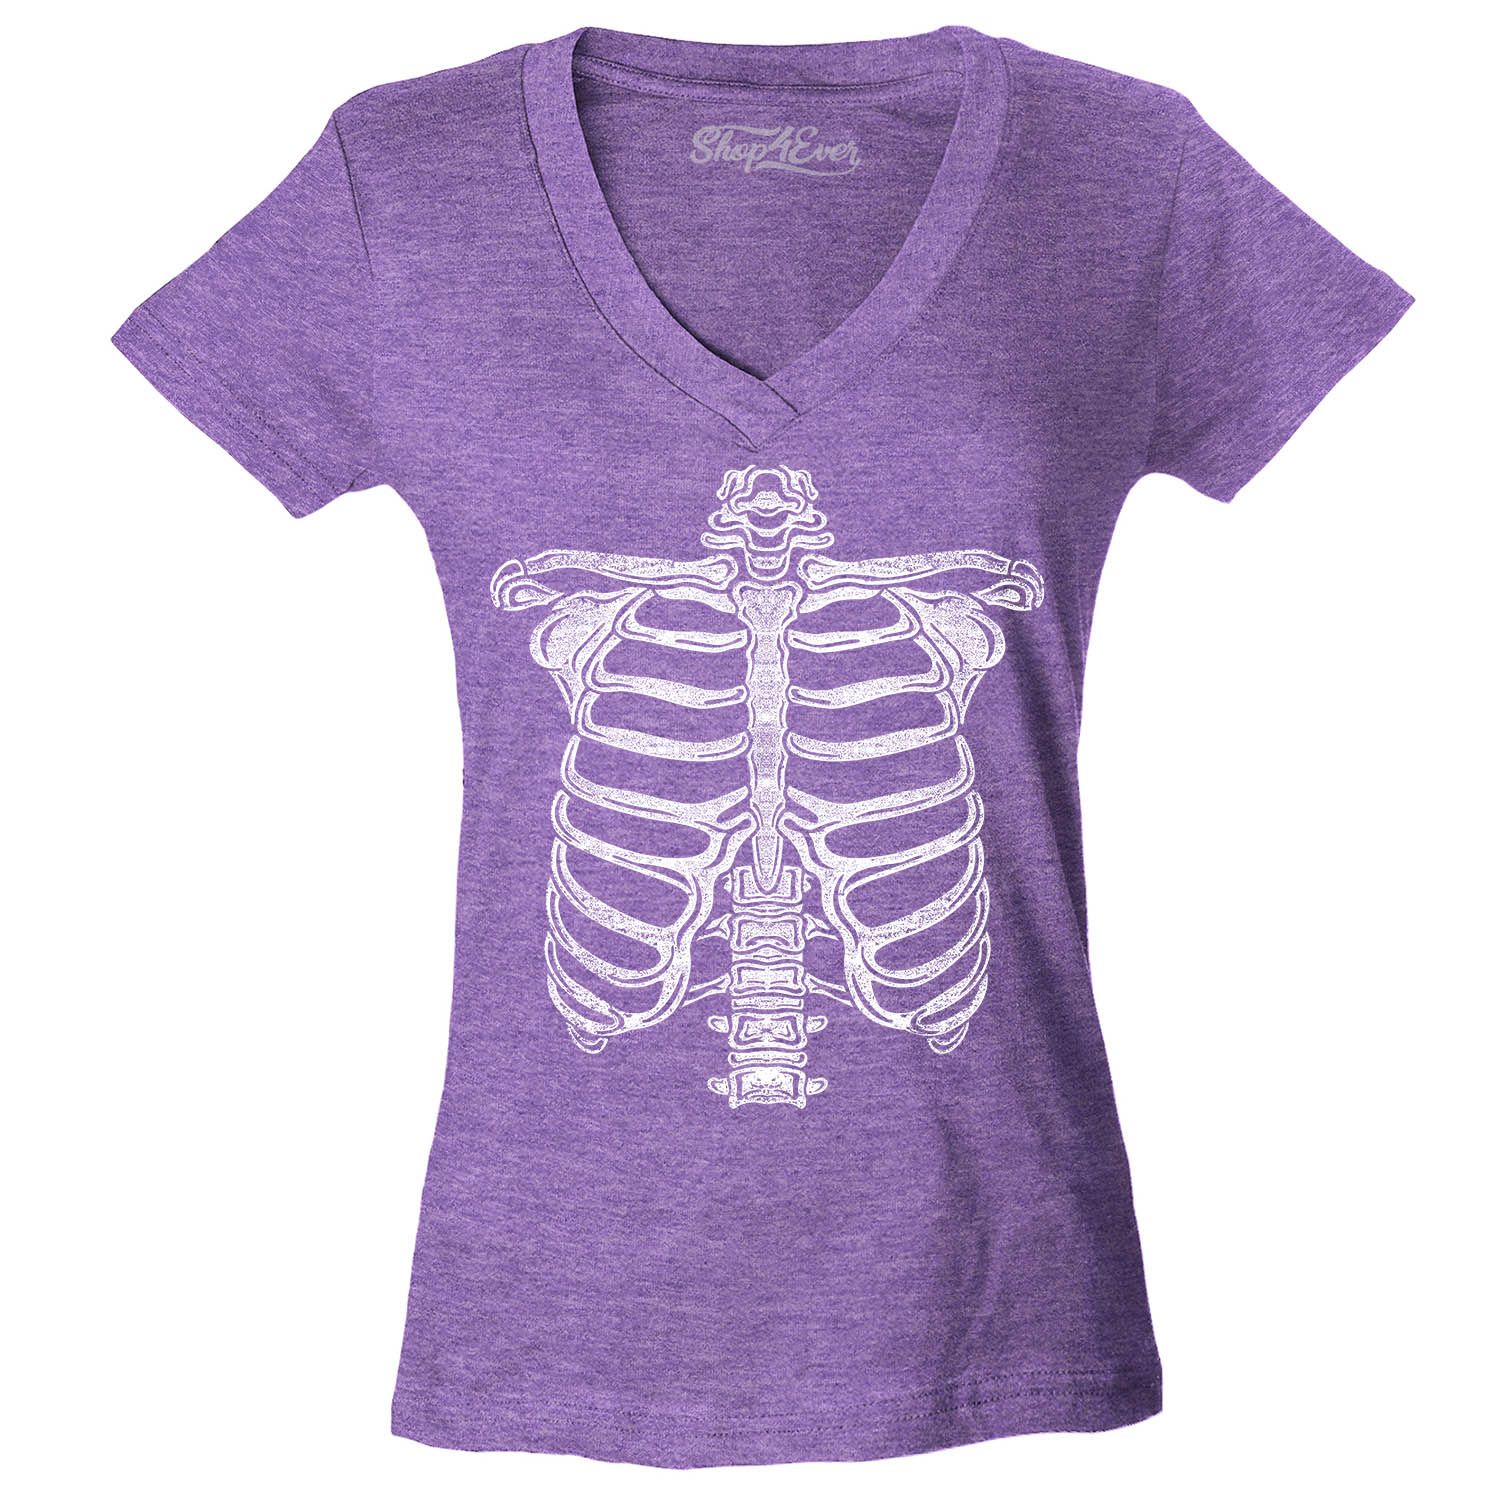 Ribcage V-neck Shirts T shirts for Women  Skeleton Women/'s Halloween Party